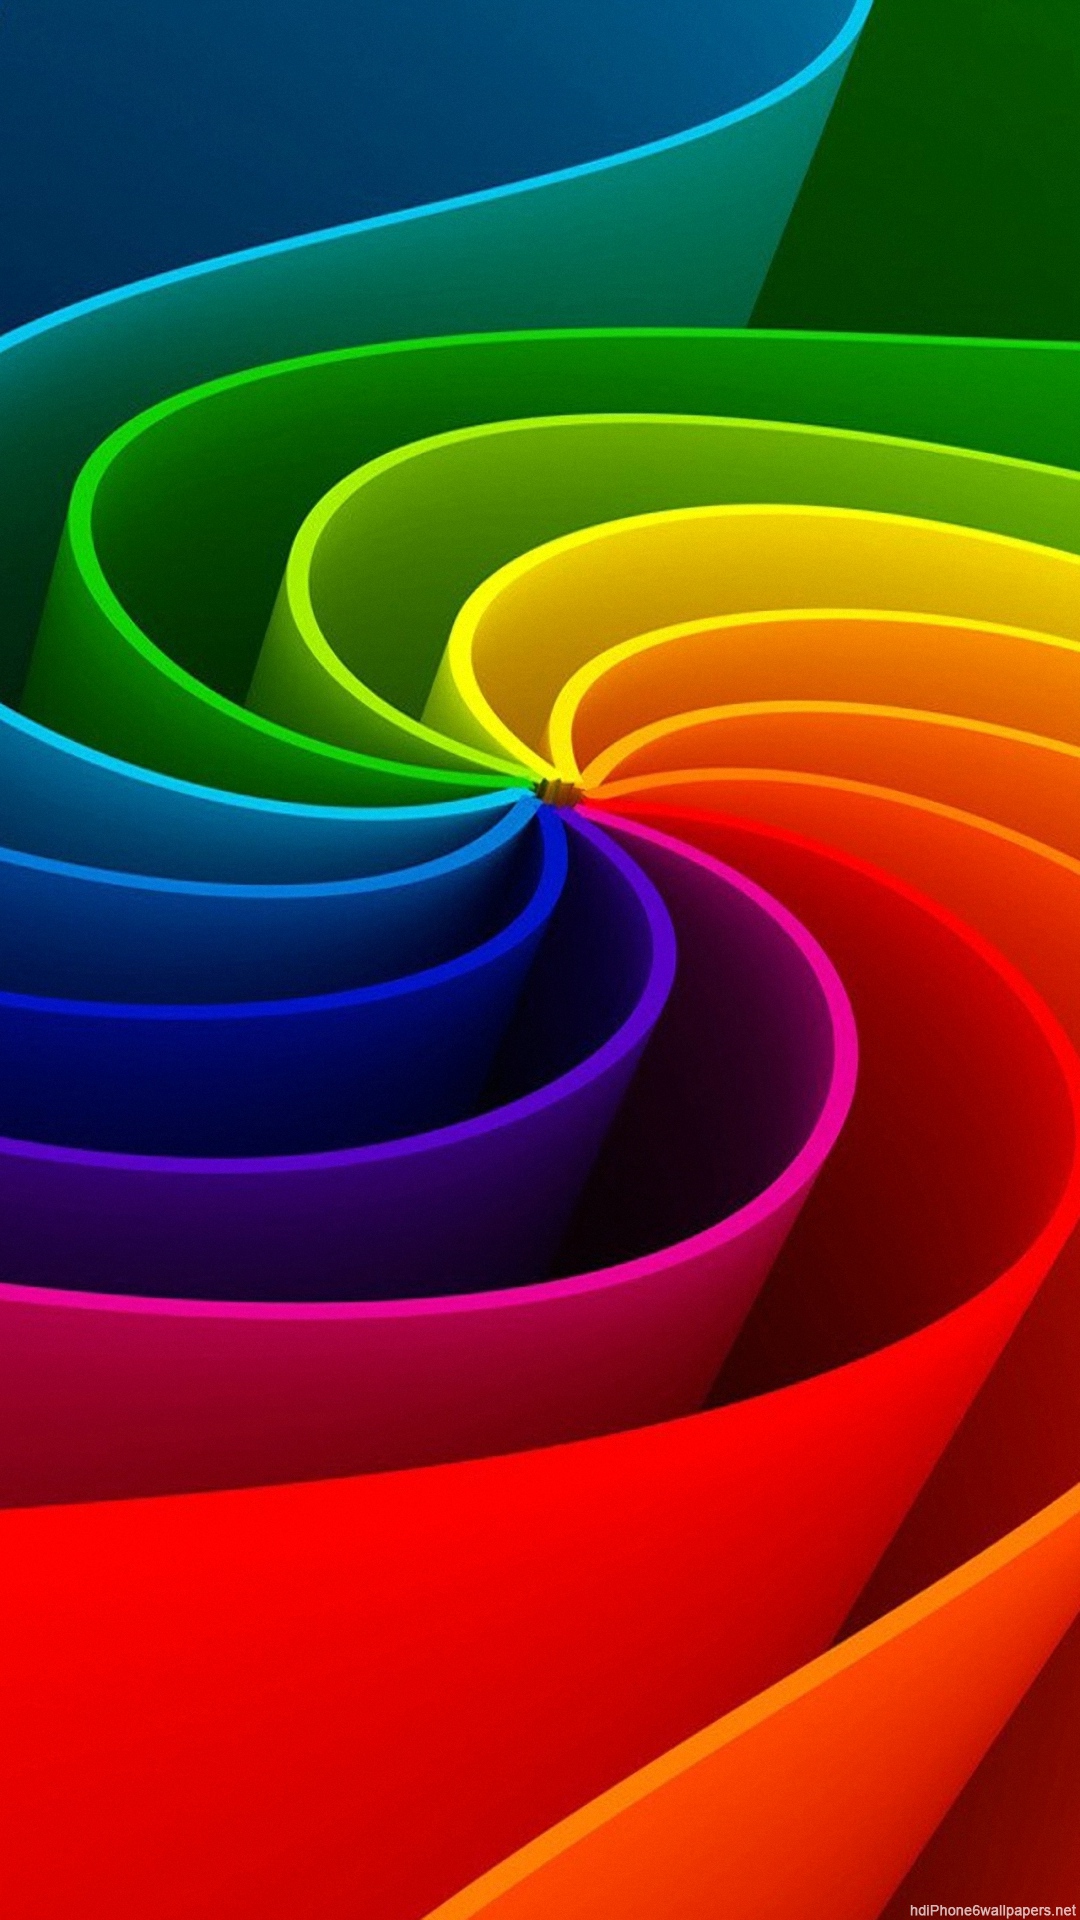 Colorfull 3D iPhone Wallpaper resolution 1080x1920